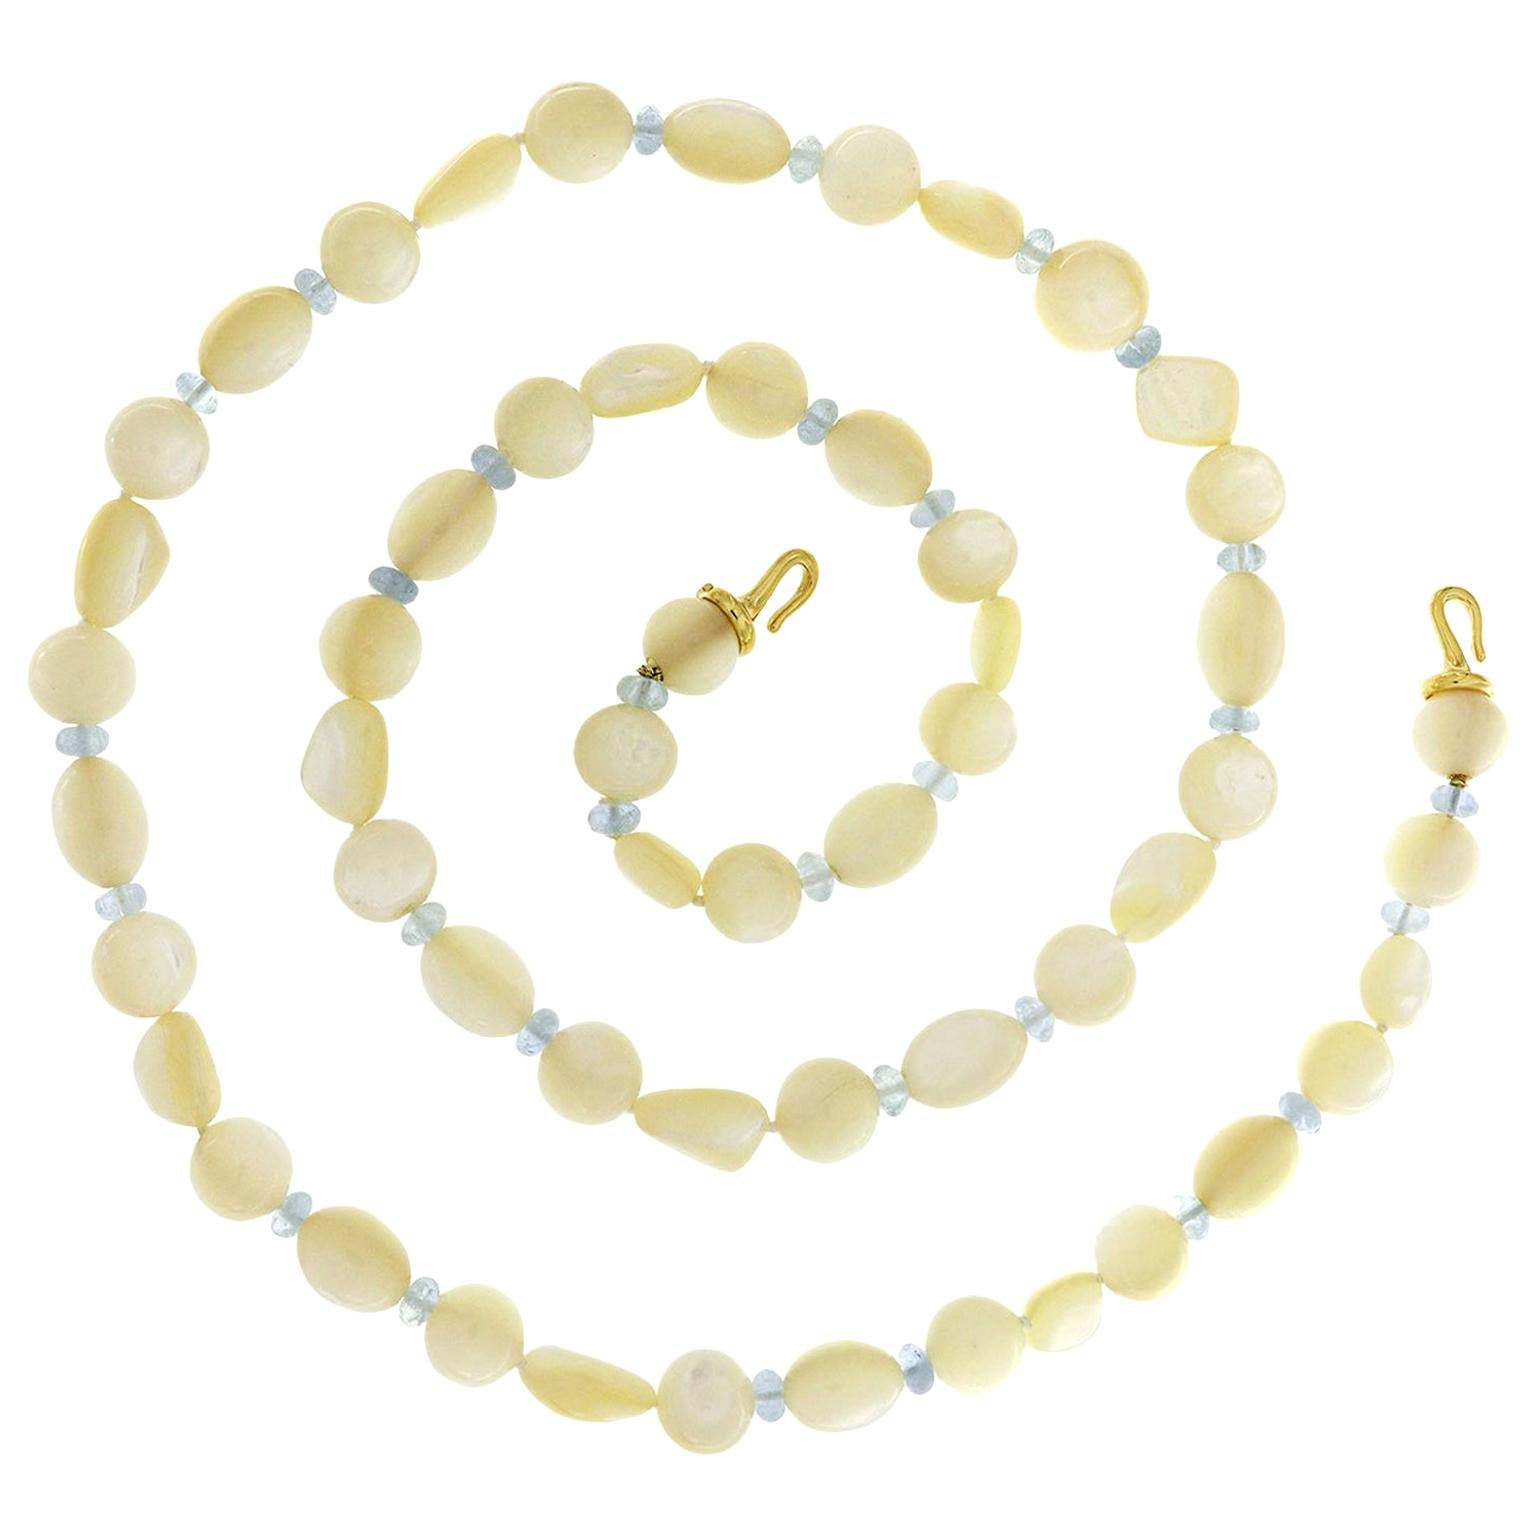  Mother of Pearl and Aquamarine Bead 18K Yellow Gold Necklace